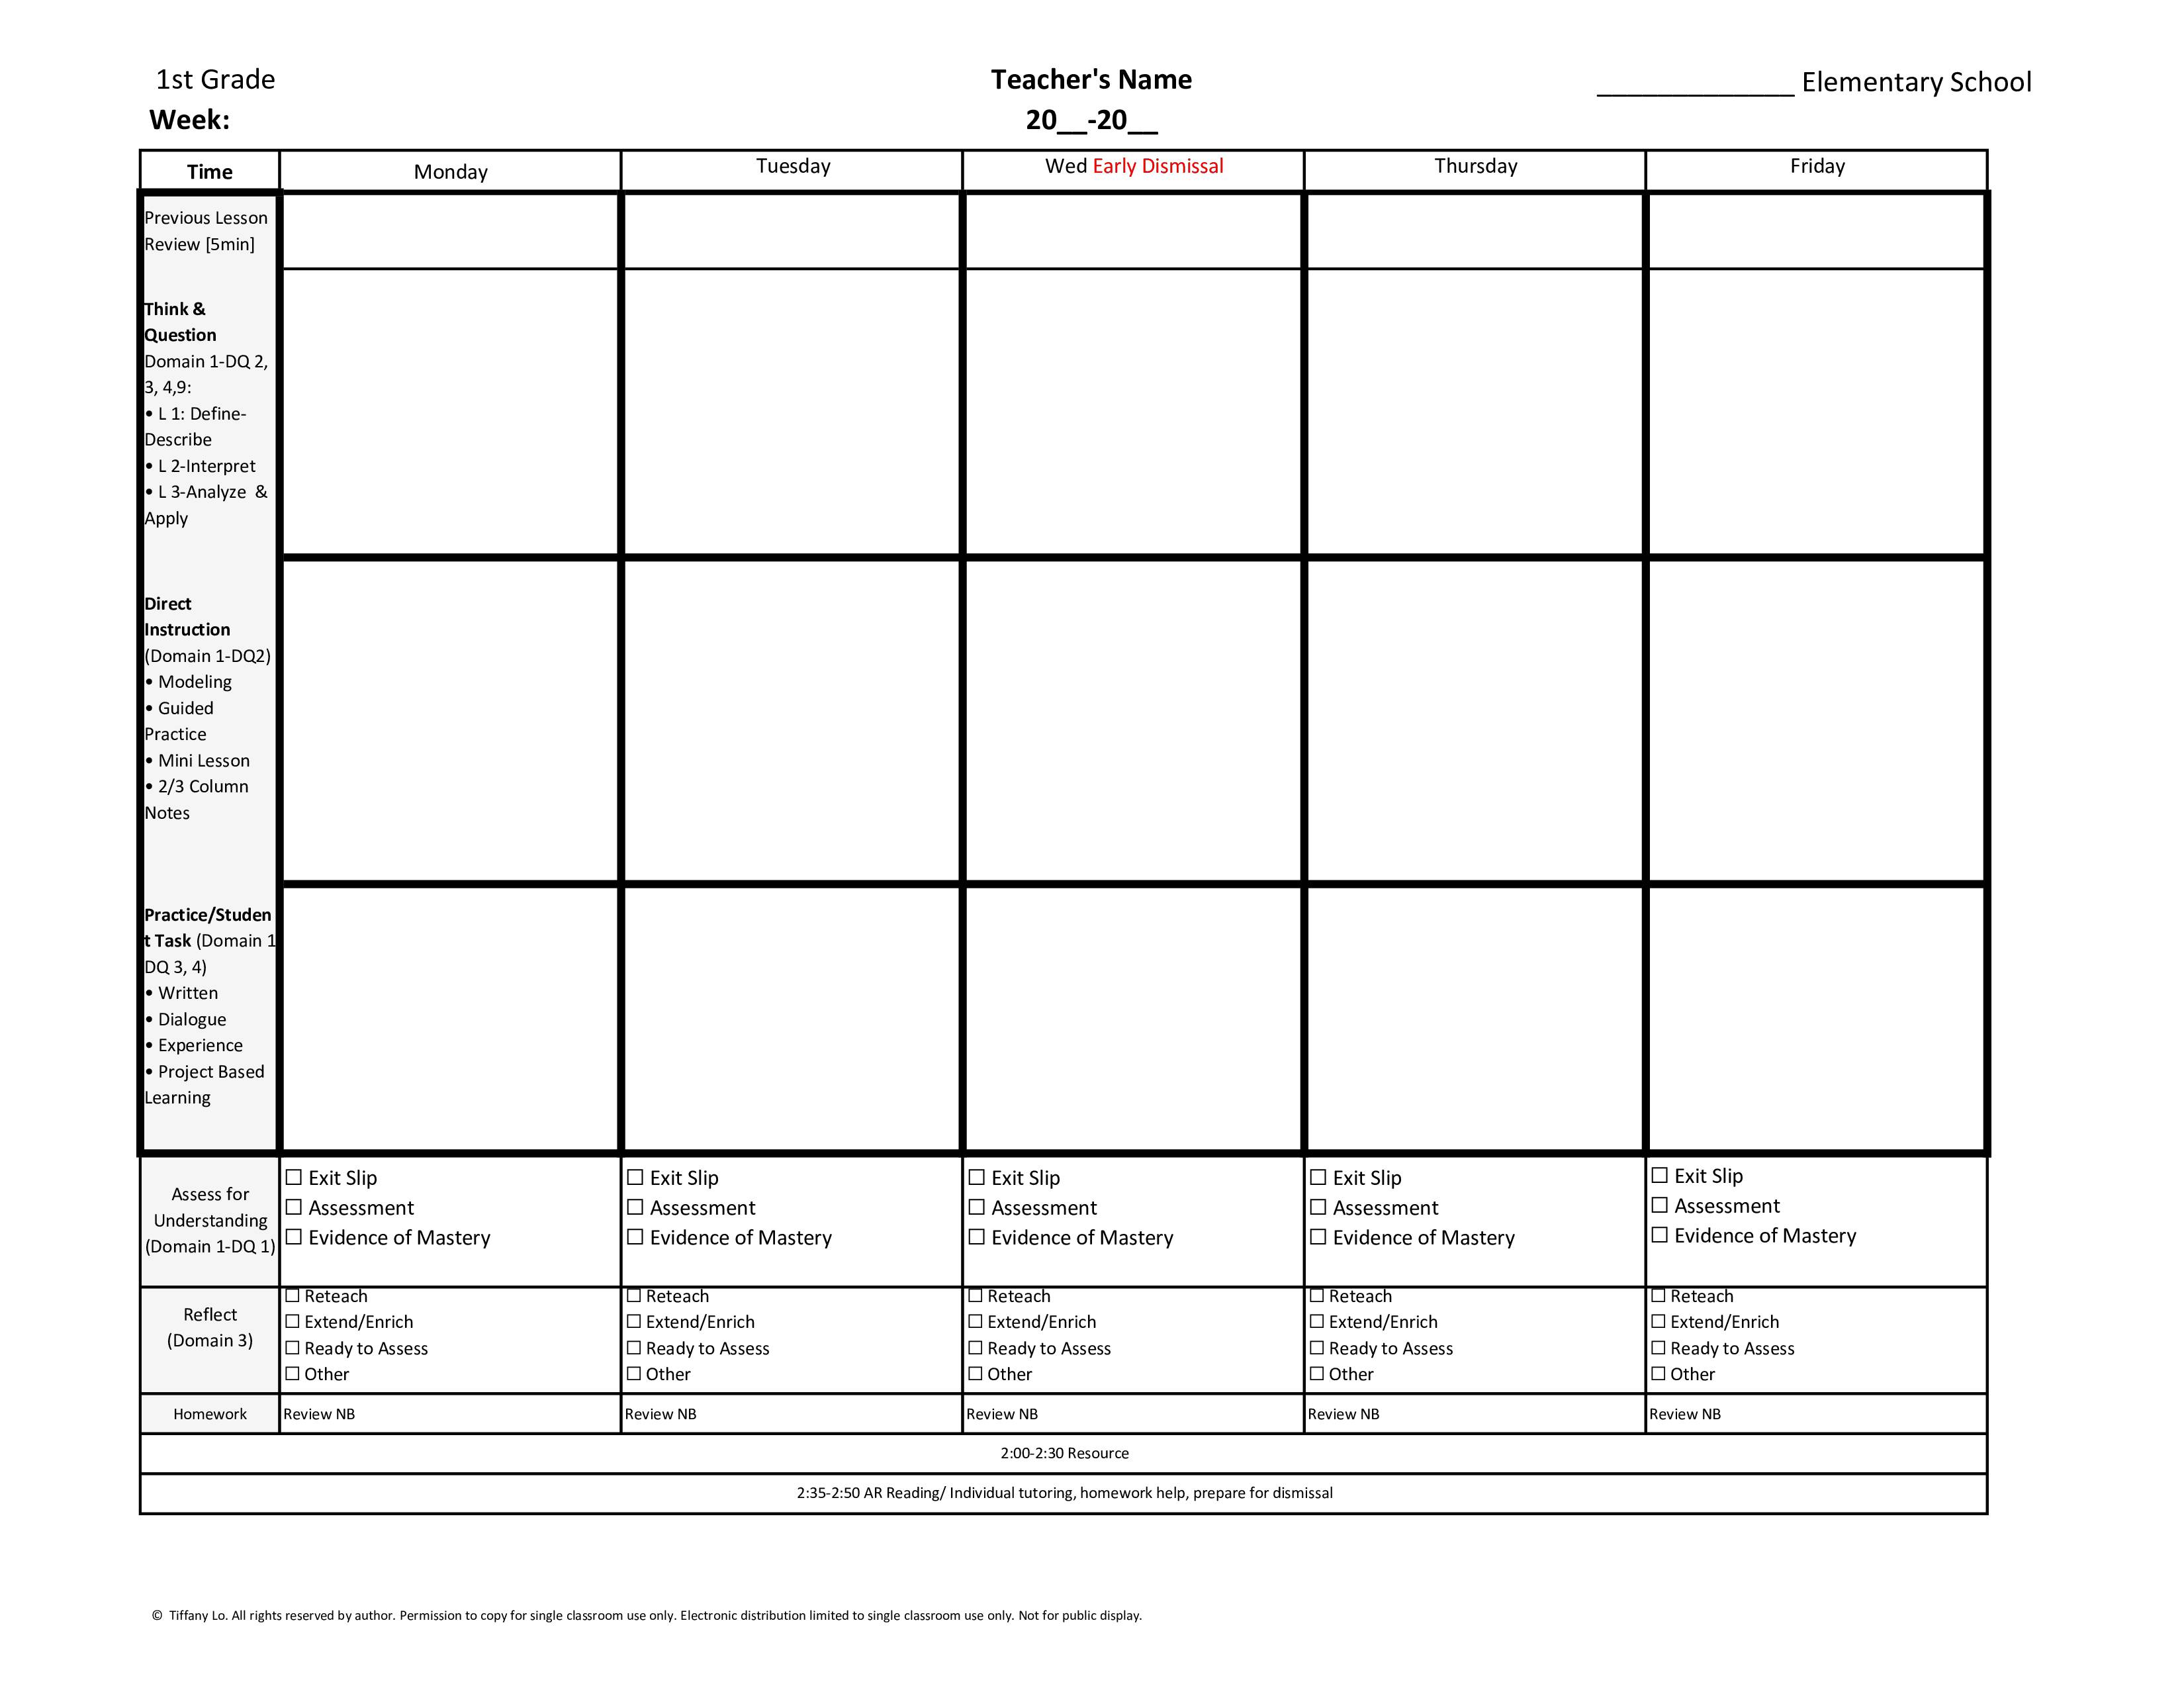 1st First Grade Common Core Weekly Lesson Plan Template W Drop Down 